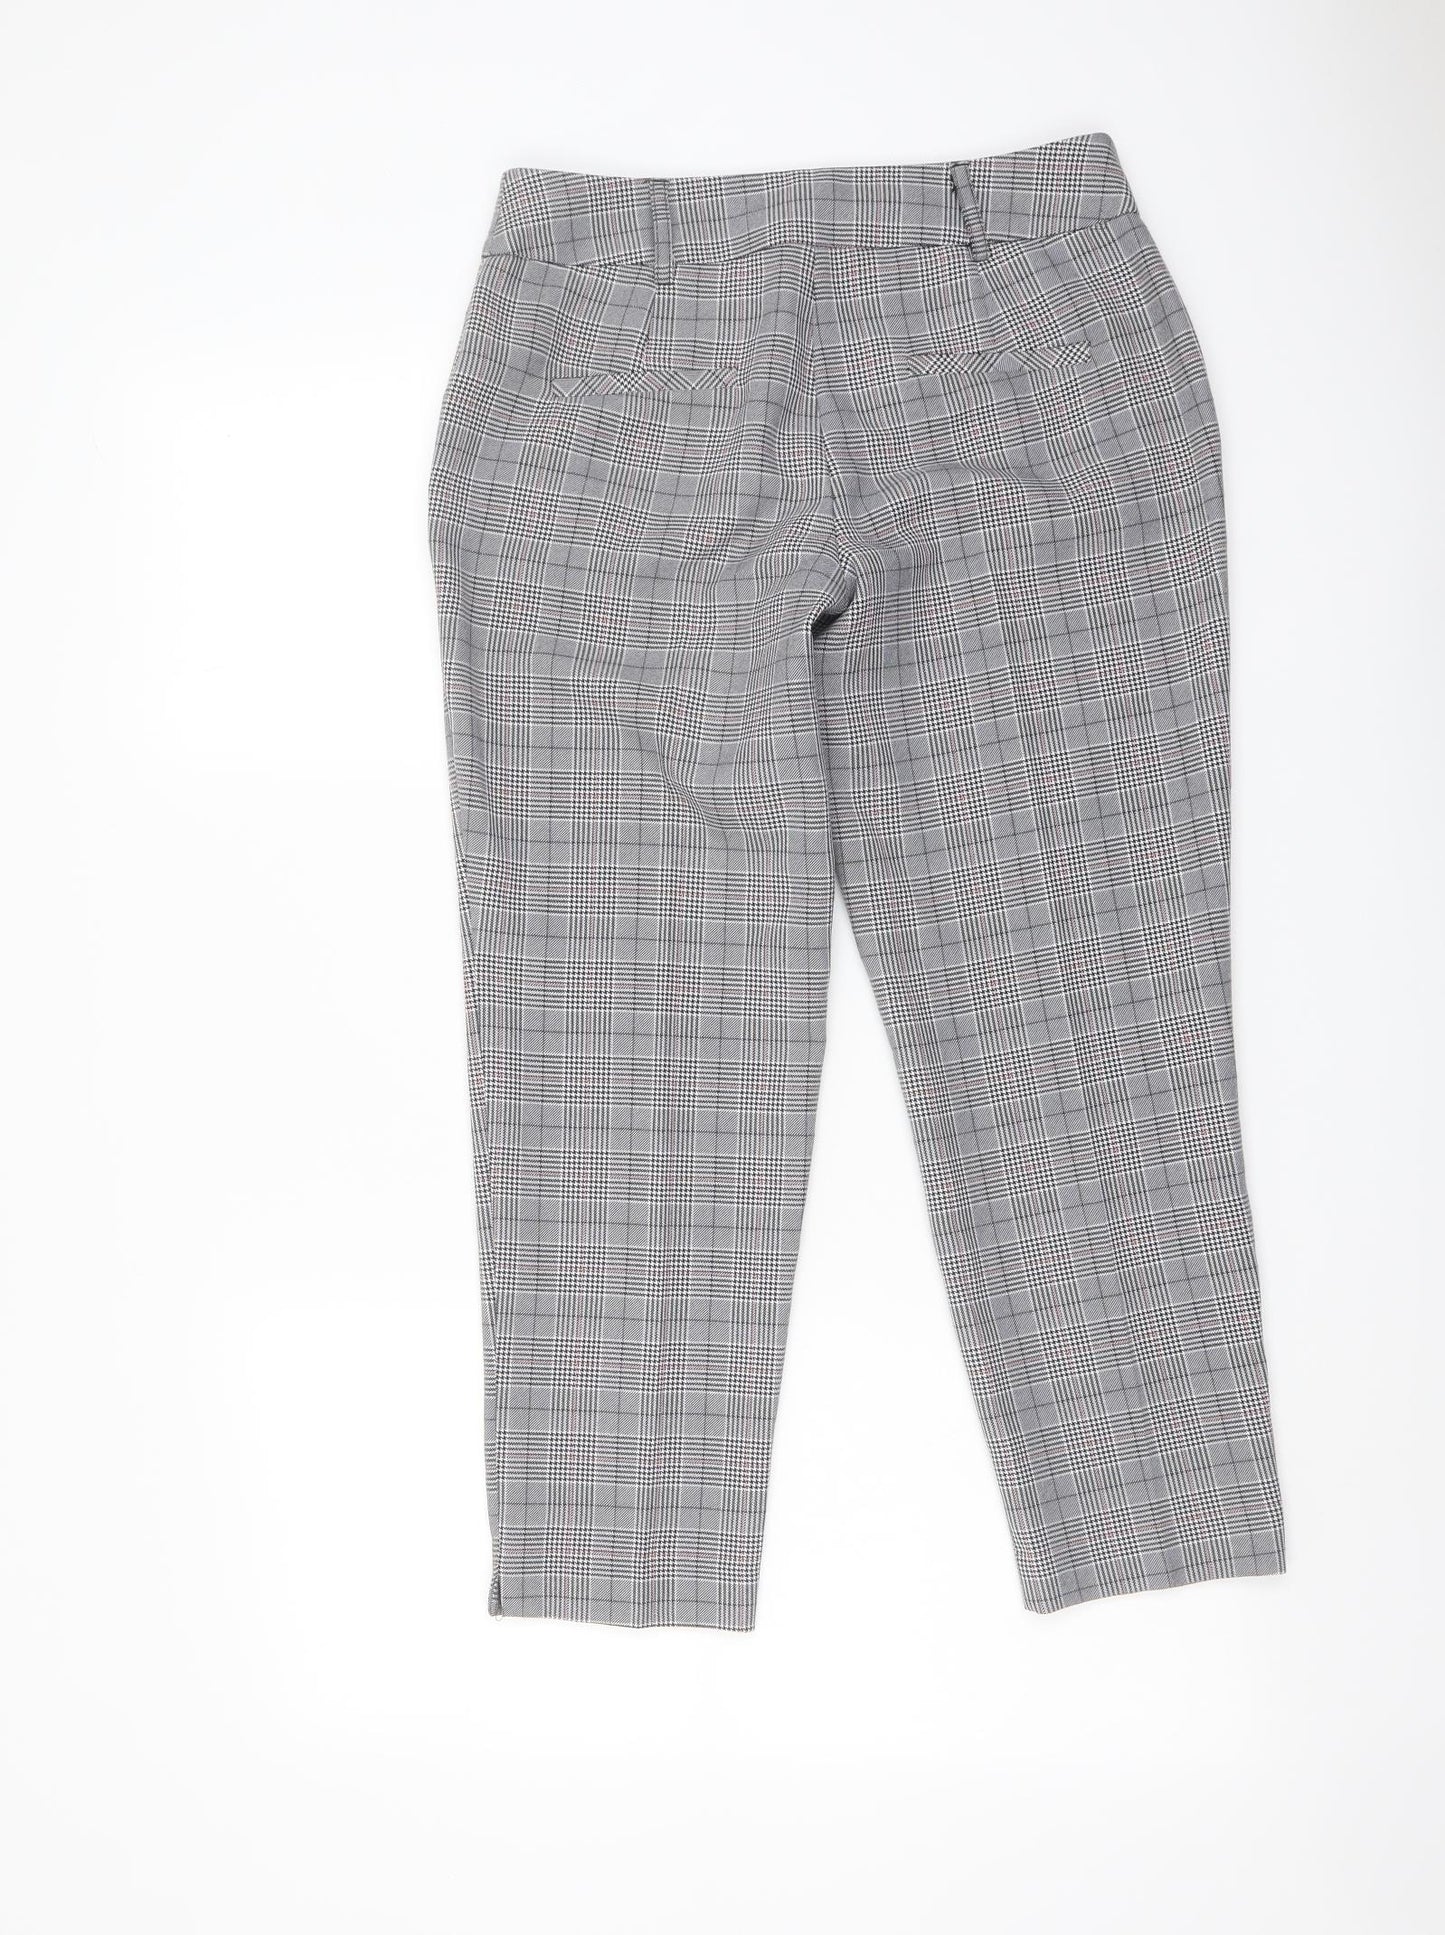 Dorothy Perkins Womens Grey Plaid Polyester Carrot Trousers Size 6 L24 in Regular Button